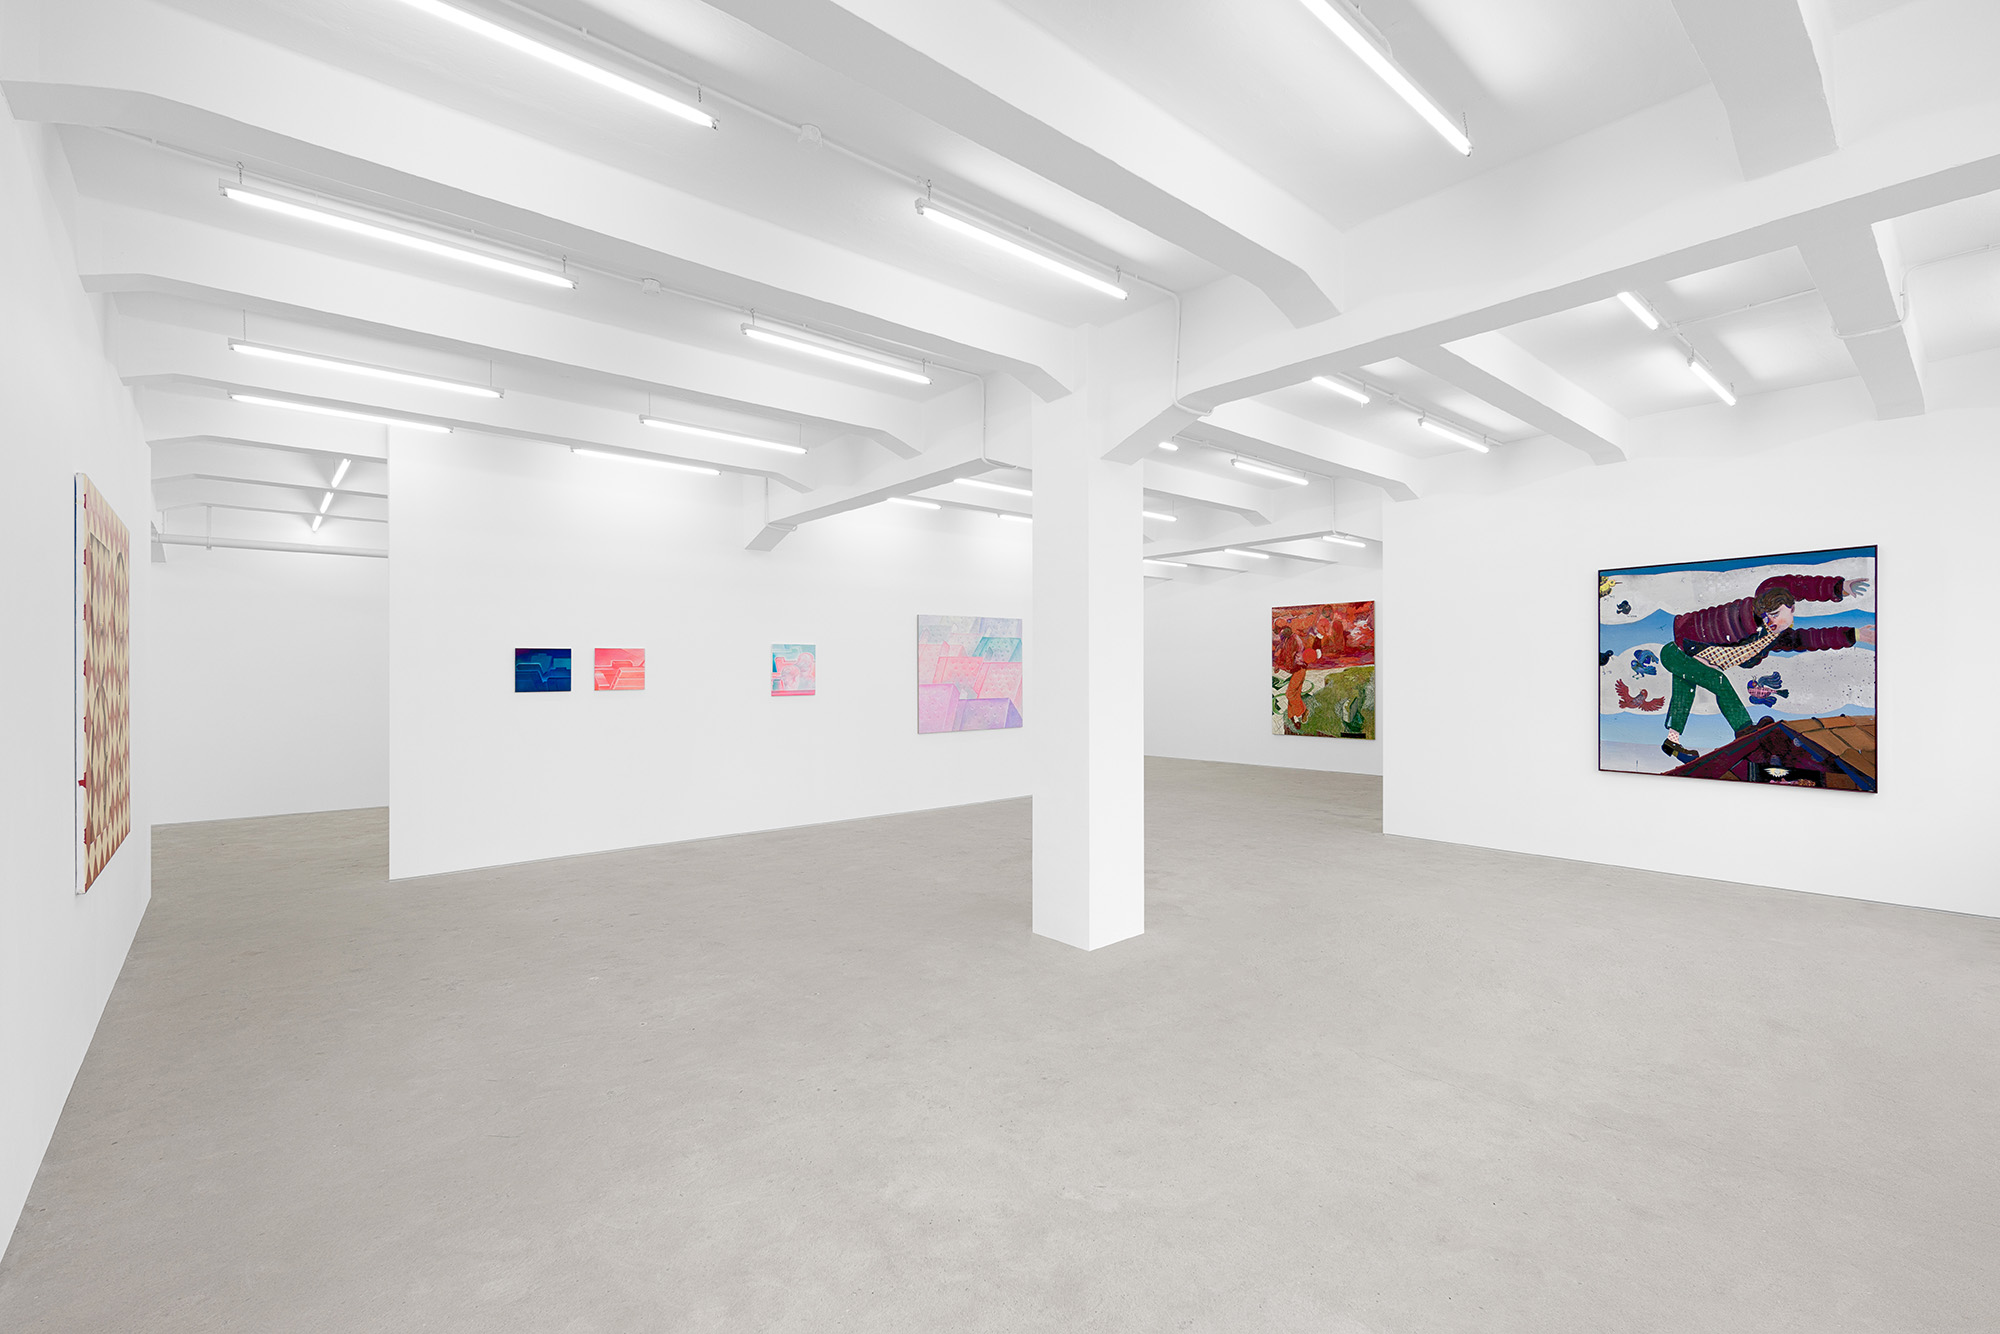 Installation view of group exhibition, Vacation II, at Gallery Vacancy, featuring works by Henry Curchod, Pieter Jennes, Richard Burton, and Charline Tyberghein.